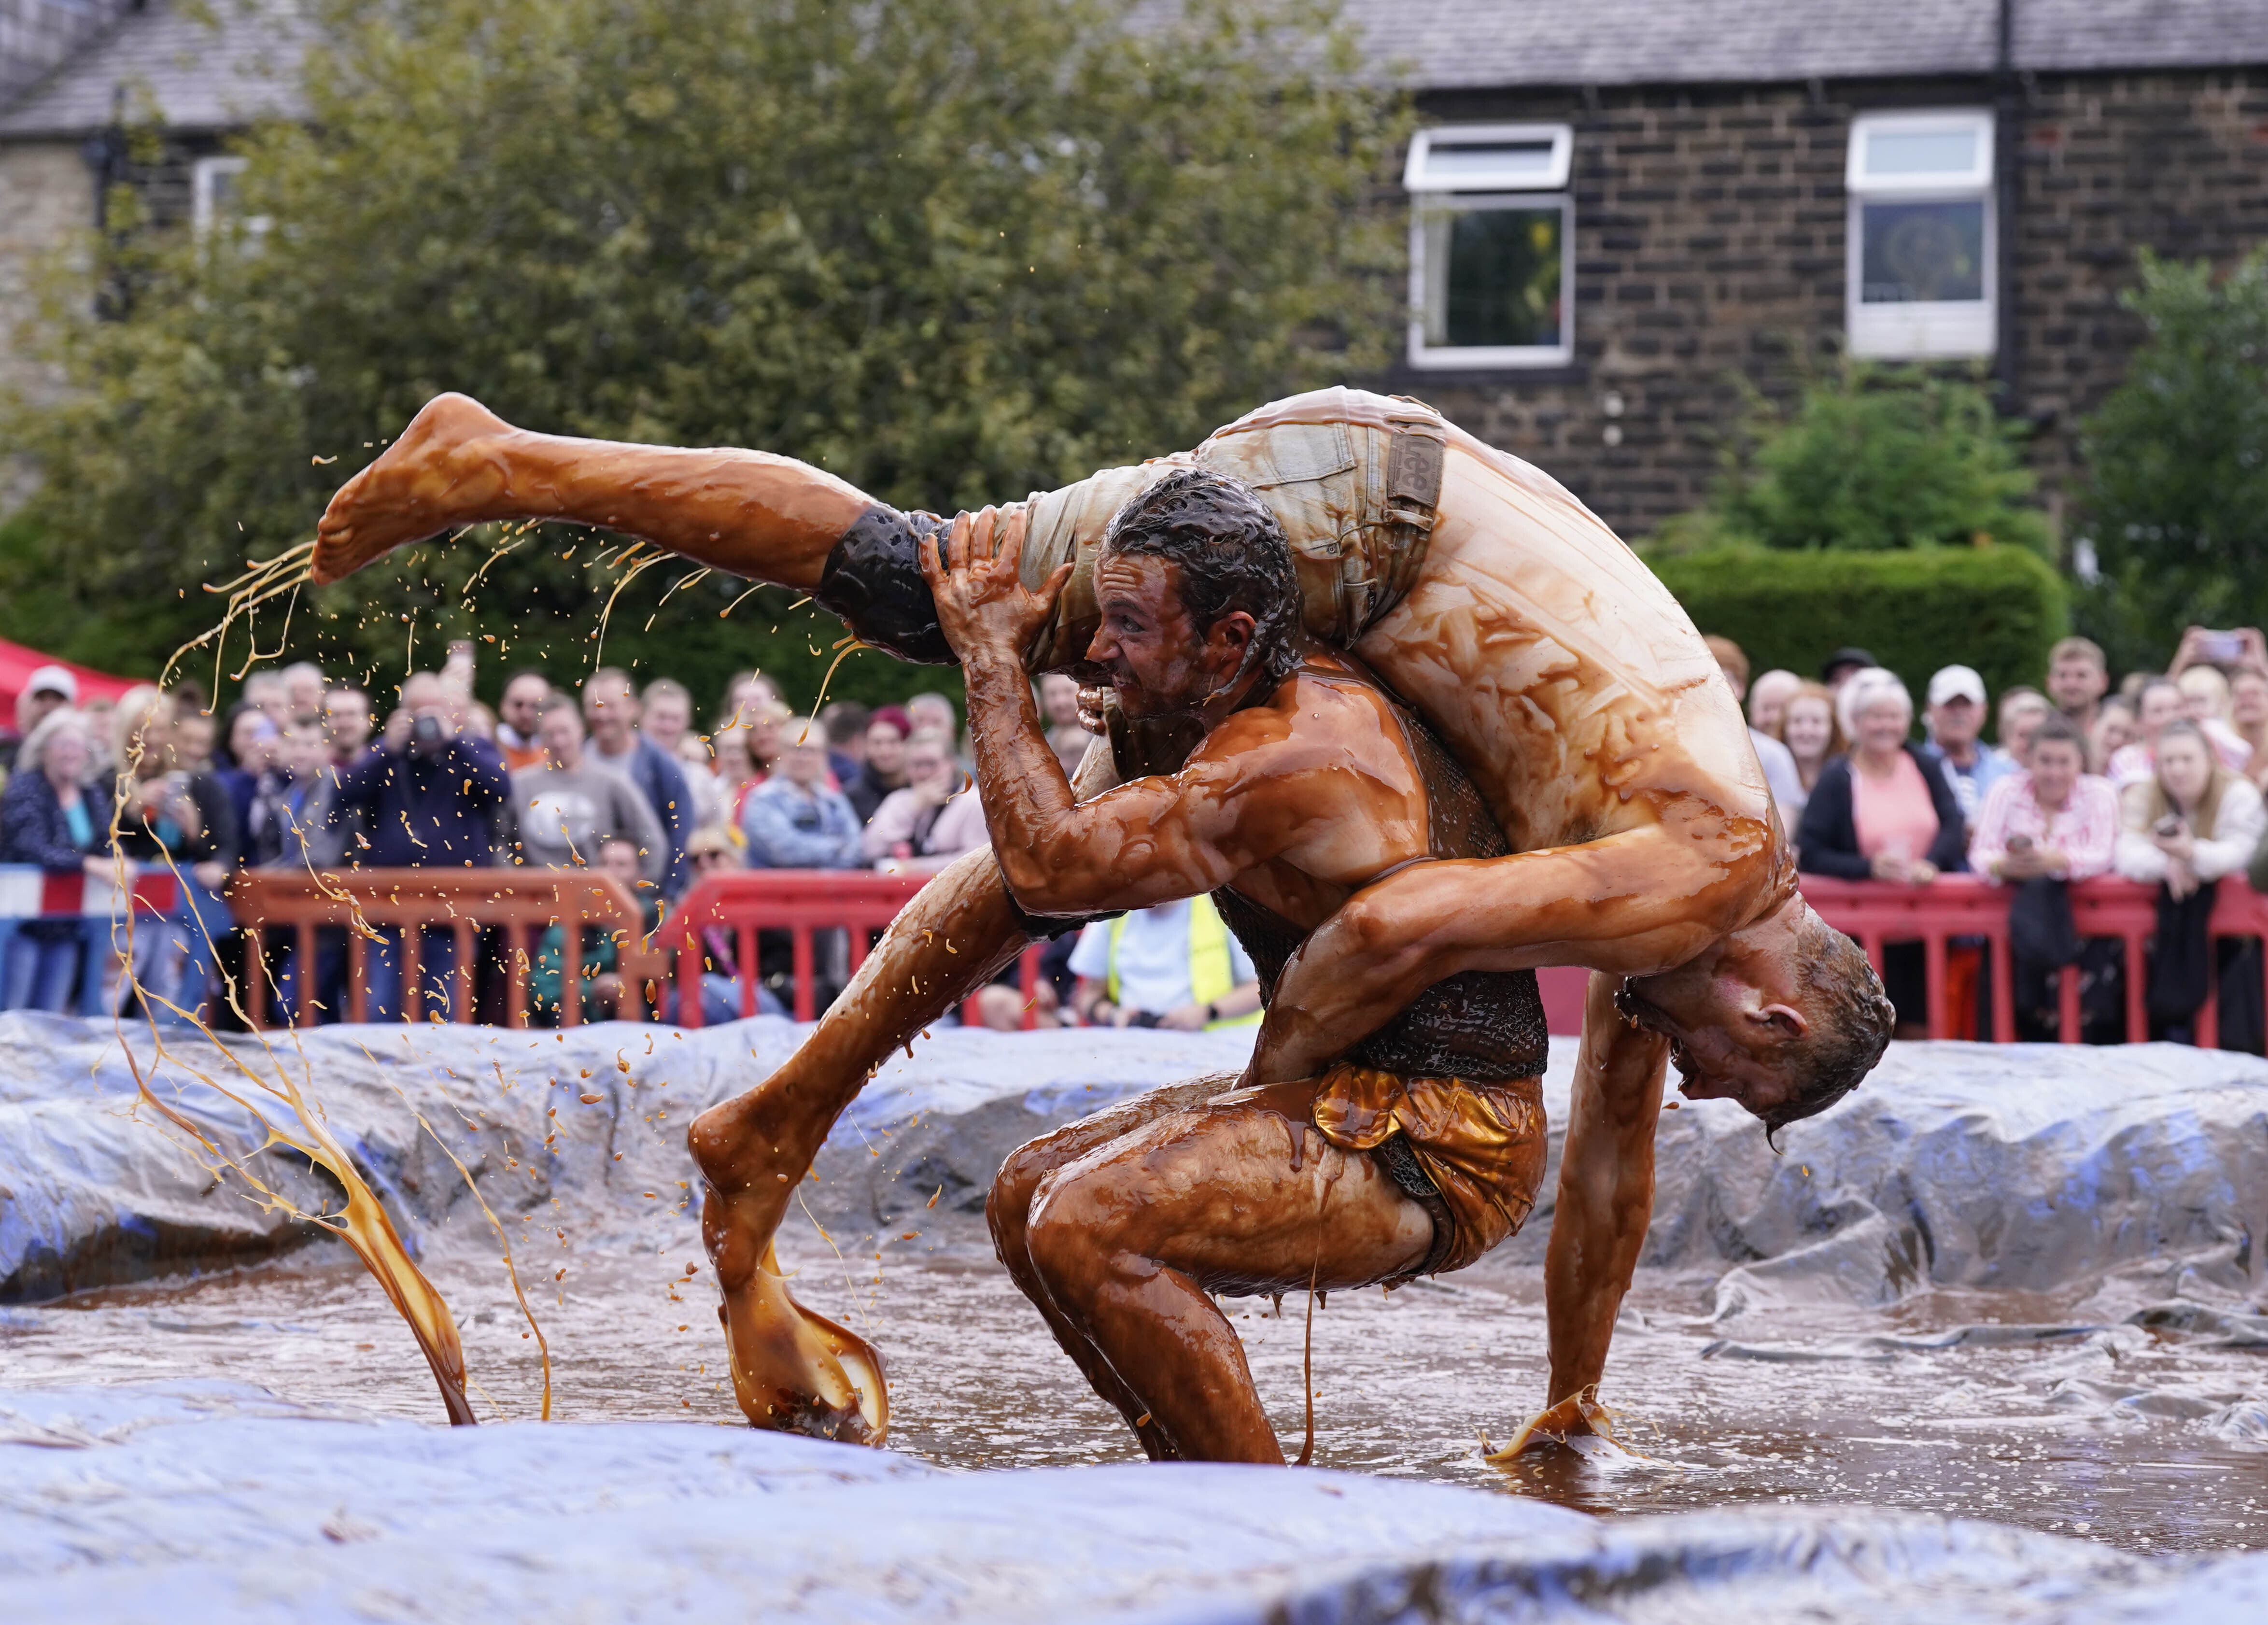 Wrestlers have two minutes to defeat their opponent at the annual event, which an organiser admitted is ‘smelly’ (Danny Lawson/PA)